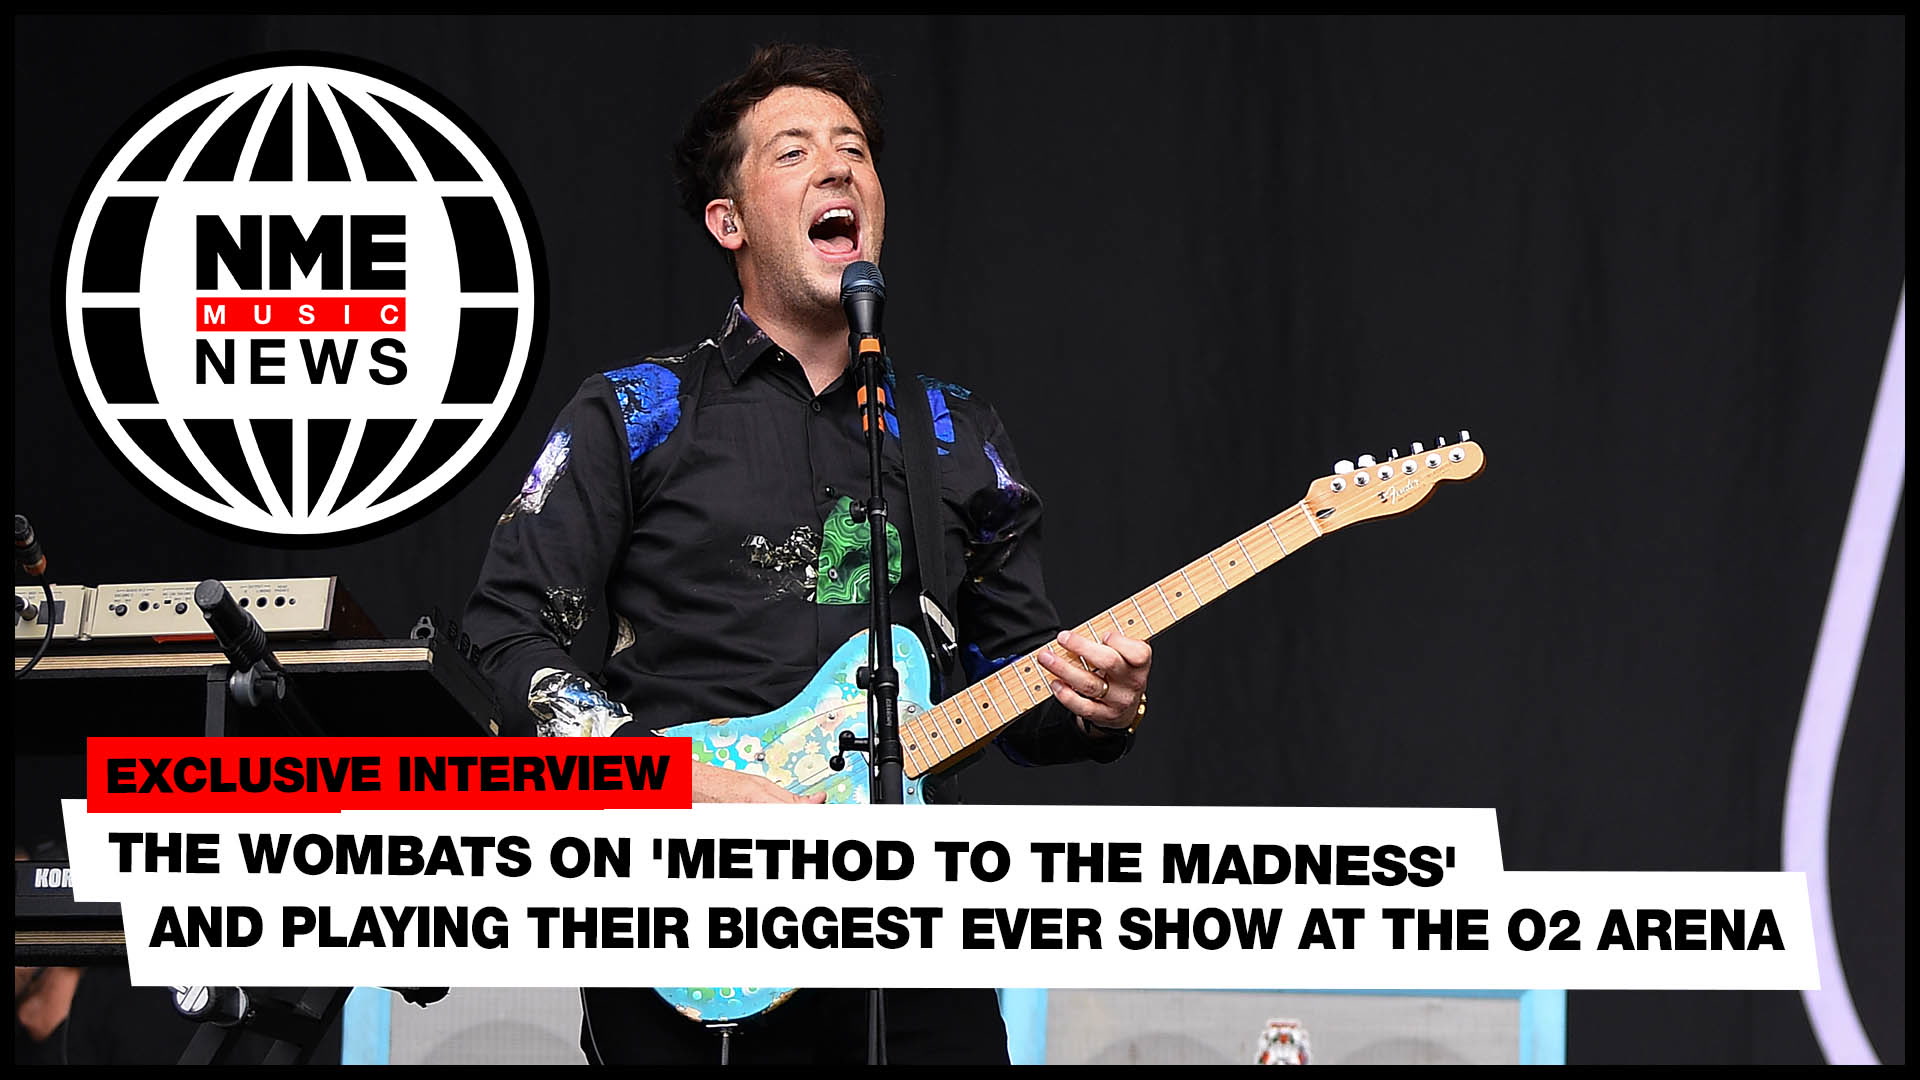 The Wombats on 'Method To The Madness' and playing 'all the hits' at The O2  Arena